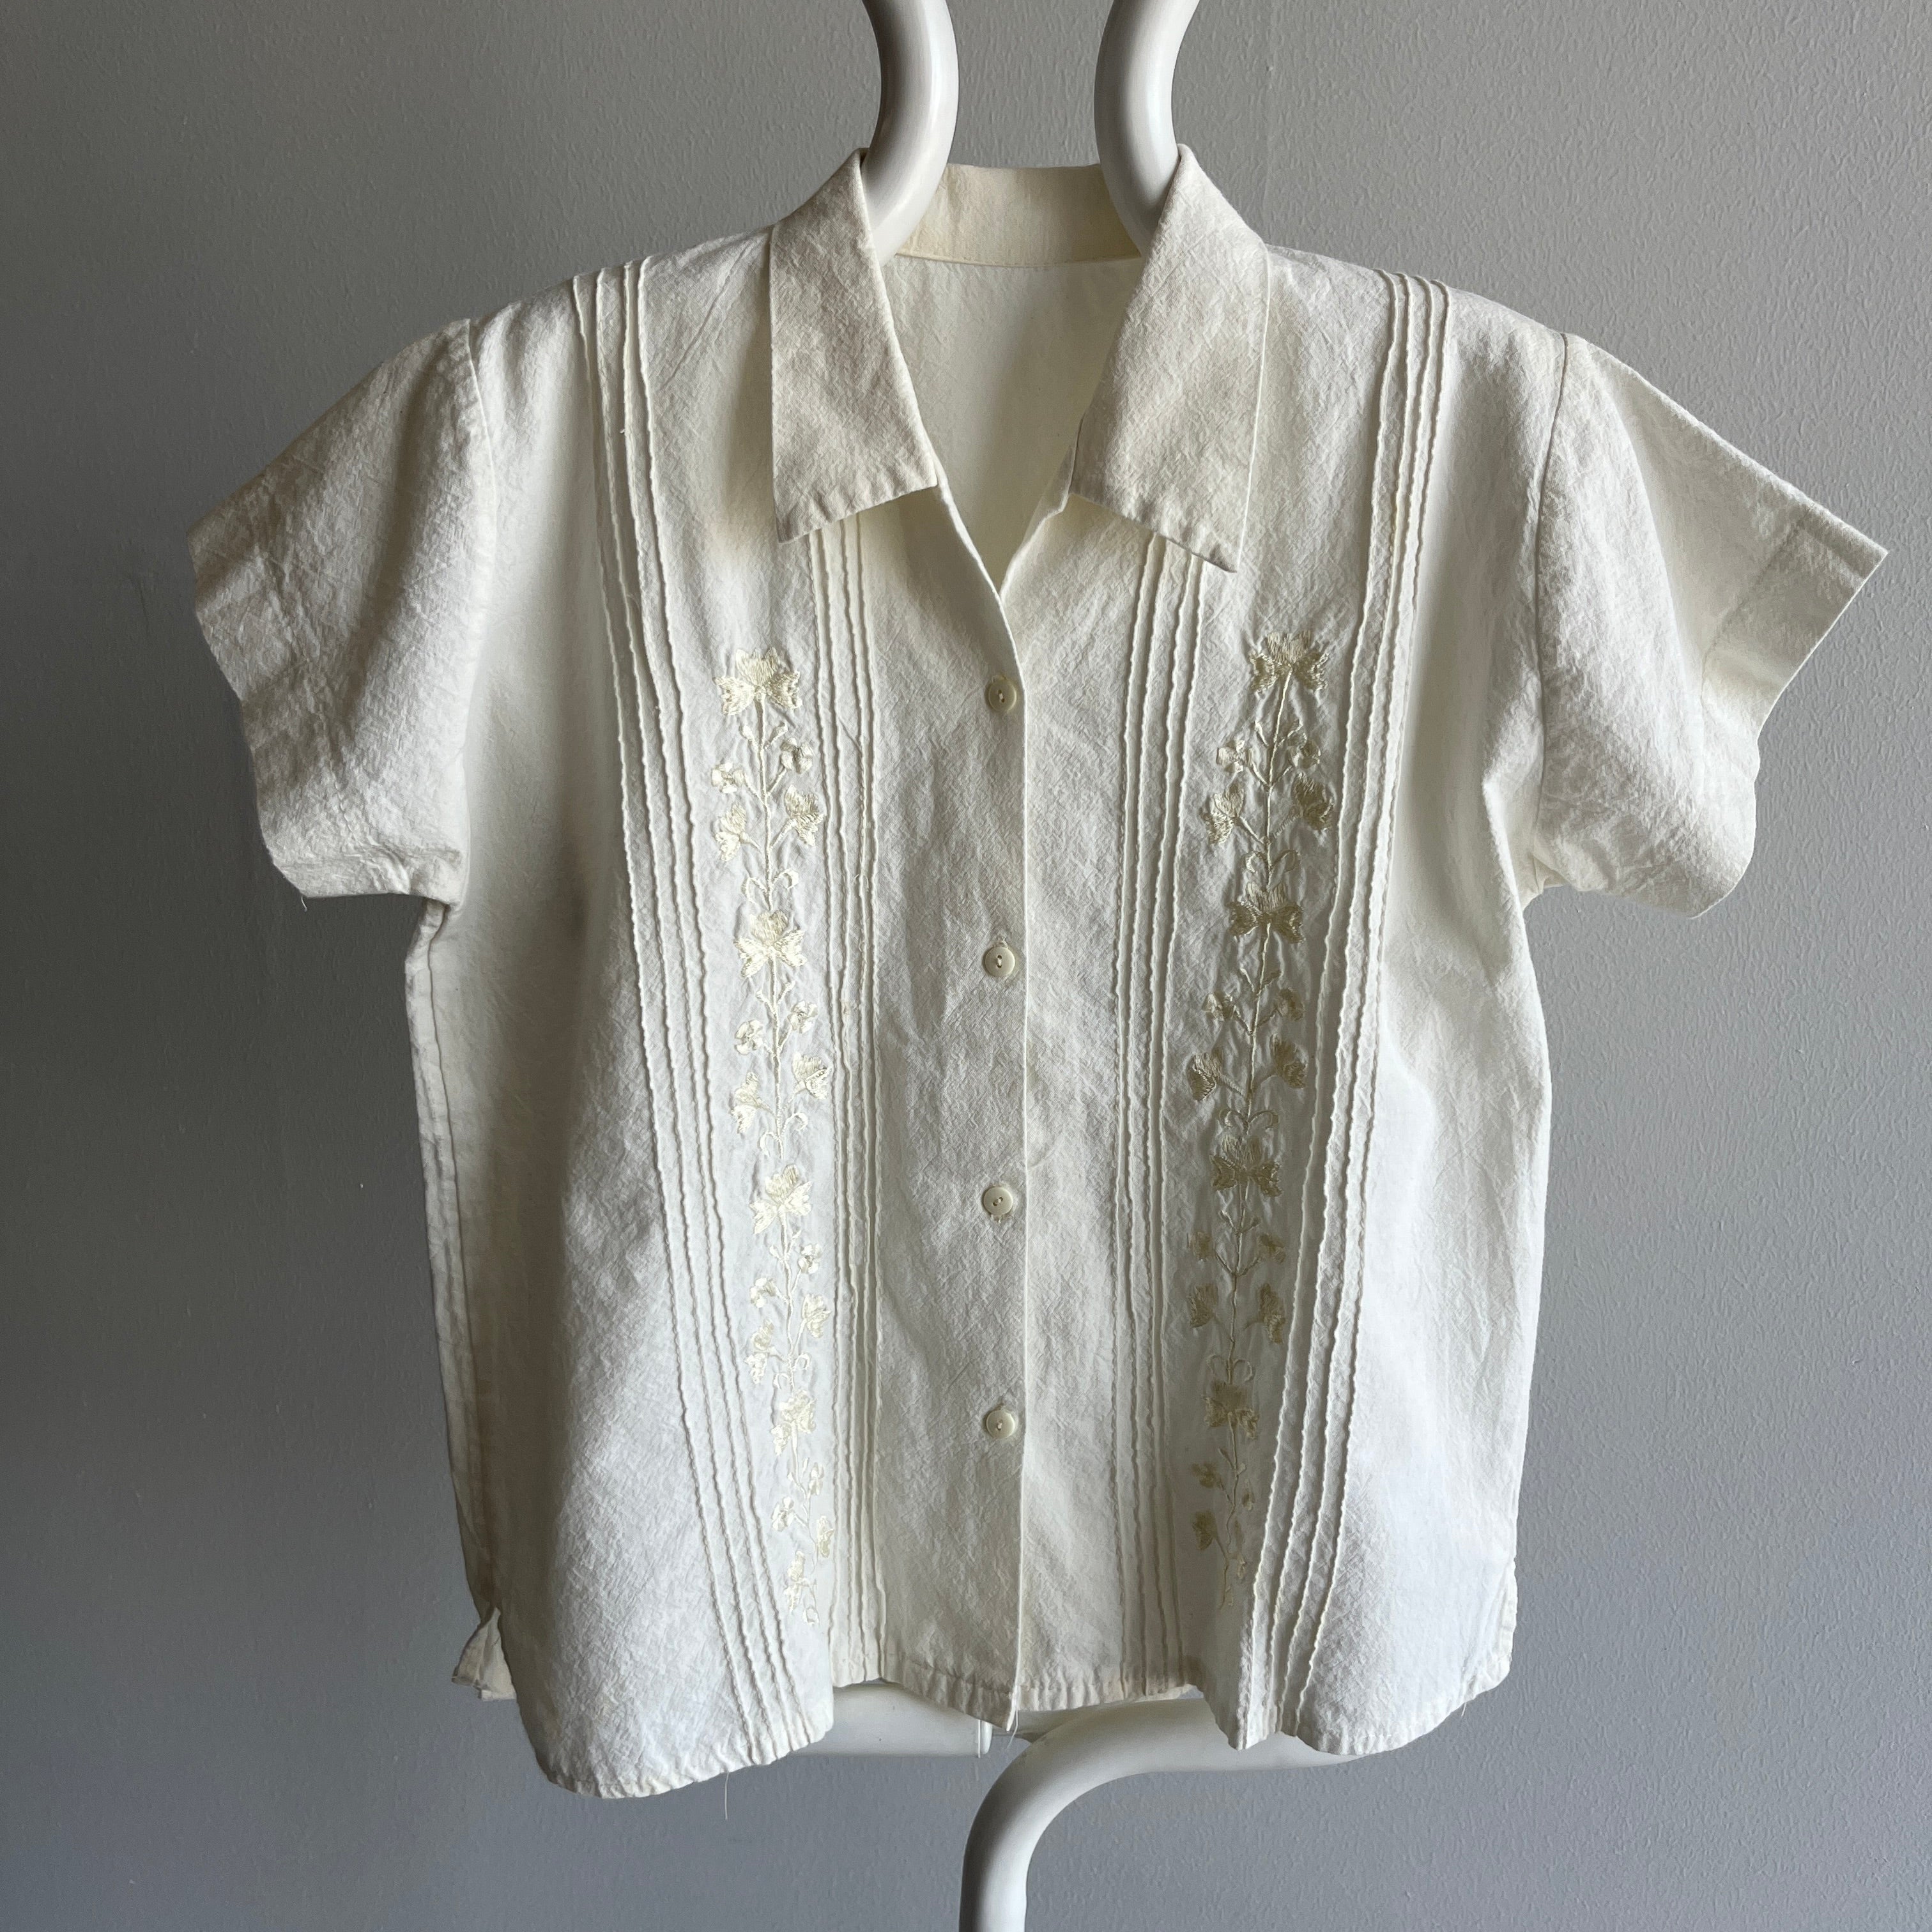 1970/80s Handmade Button Up Blouse - So Sweet